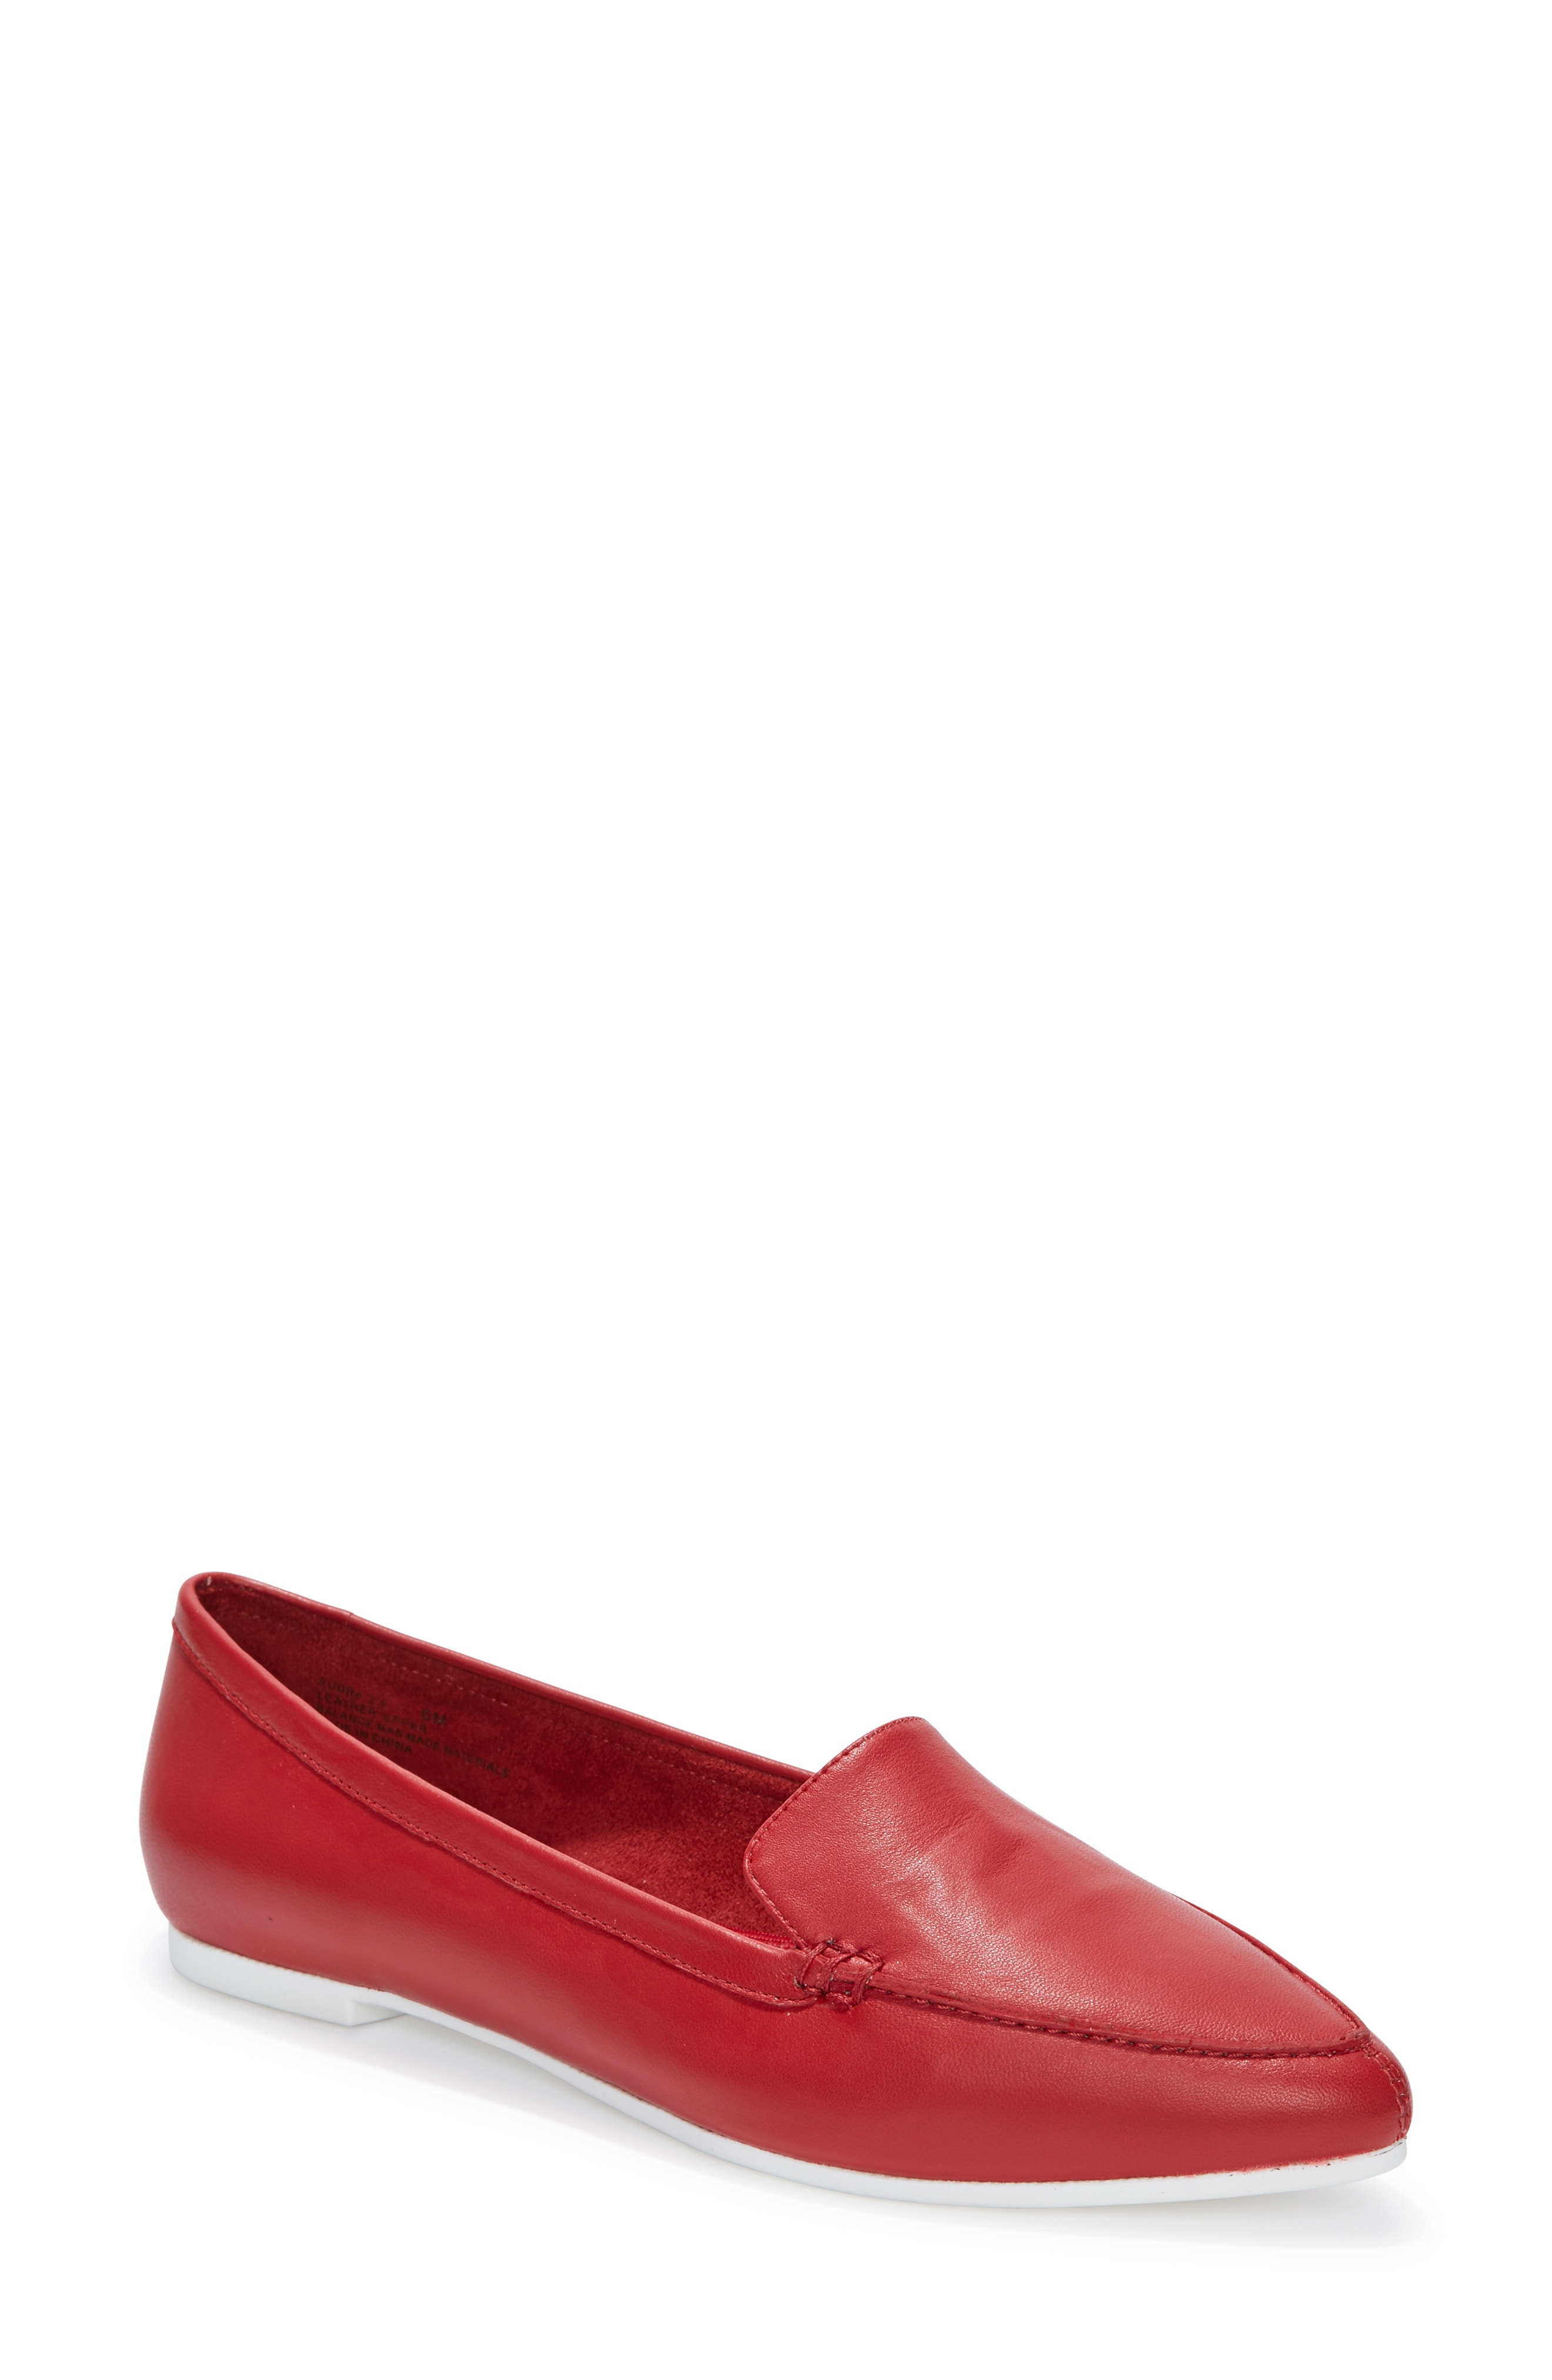 Women's Red Comfortable Shoes | Nordstrom